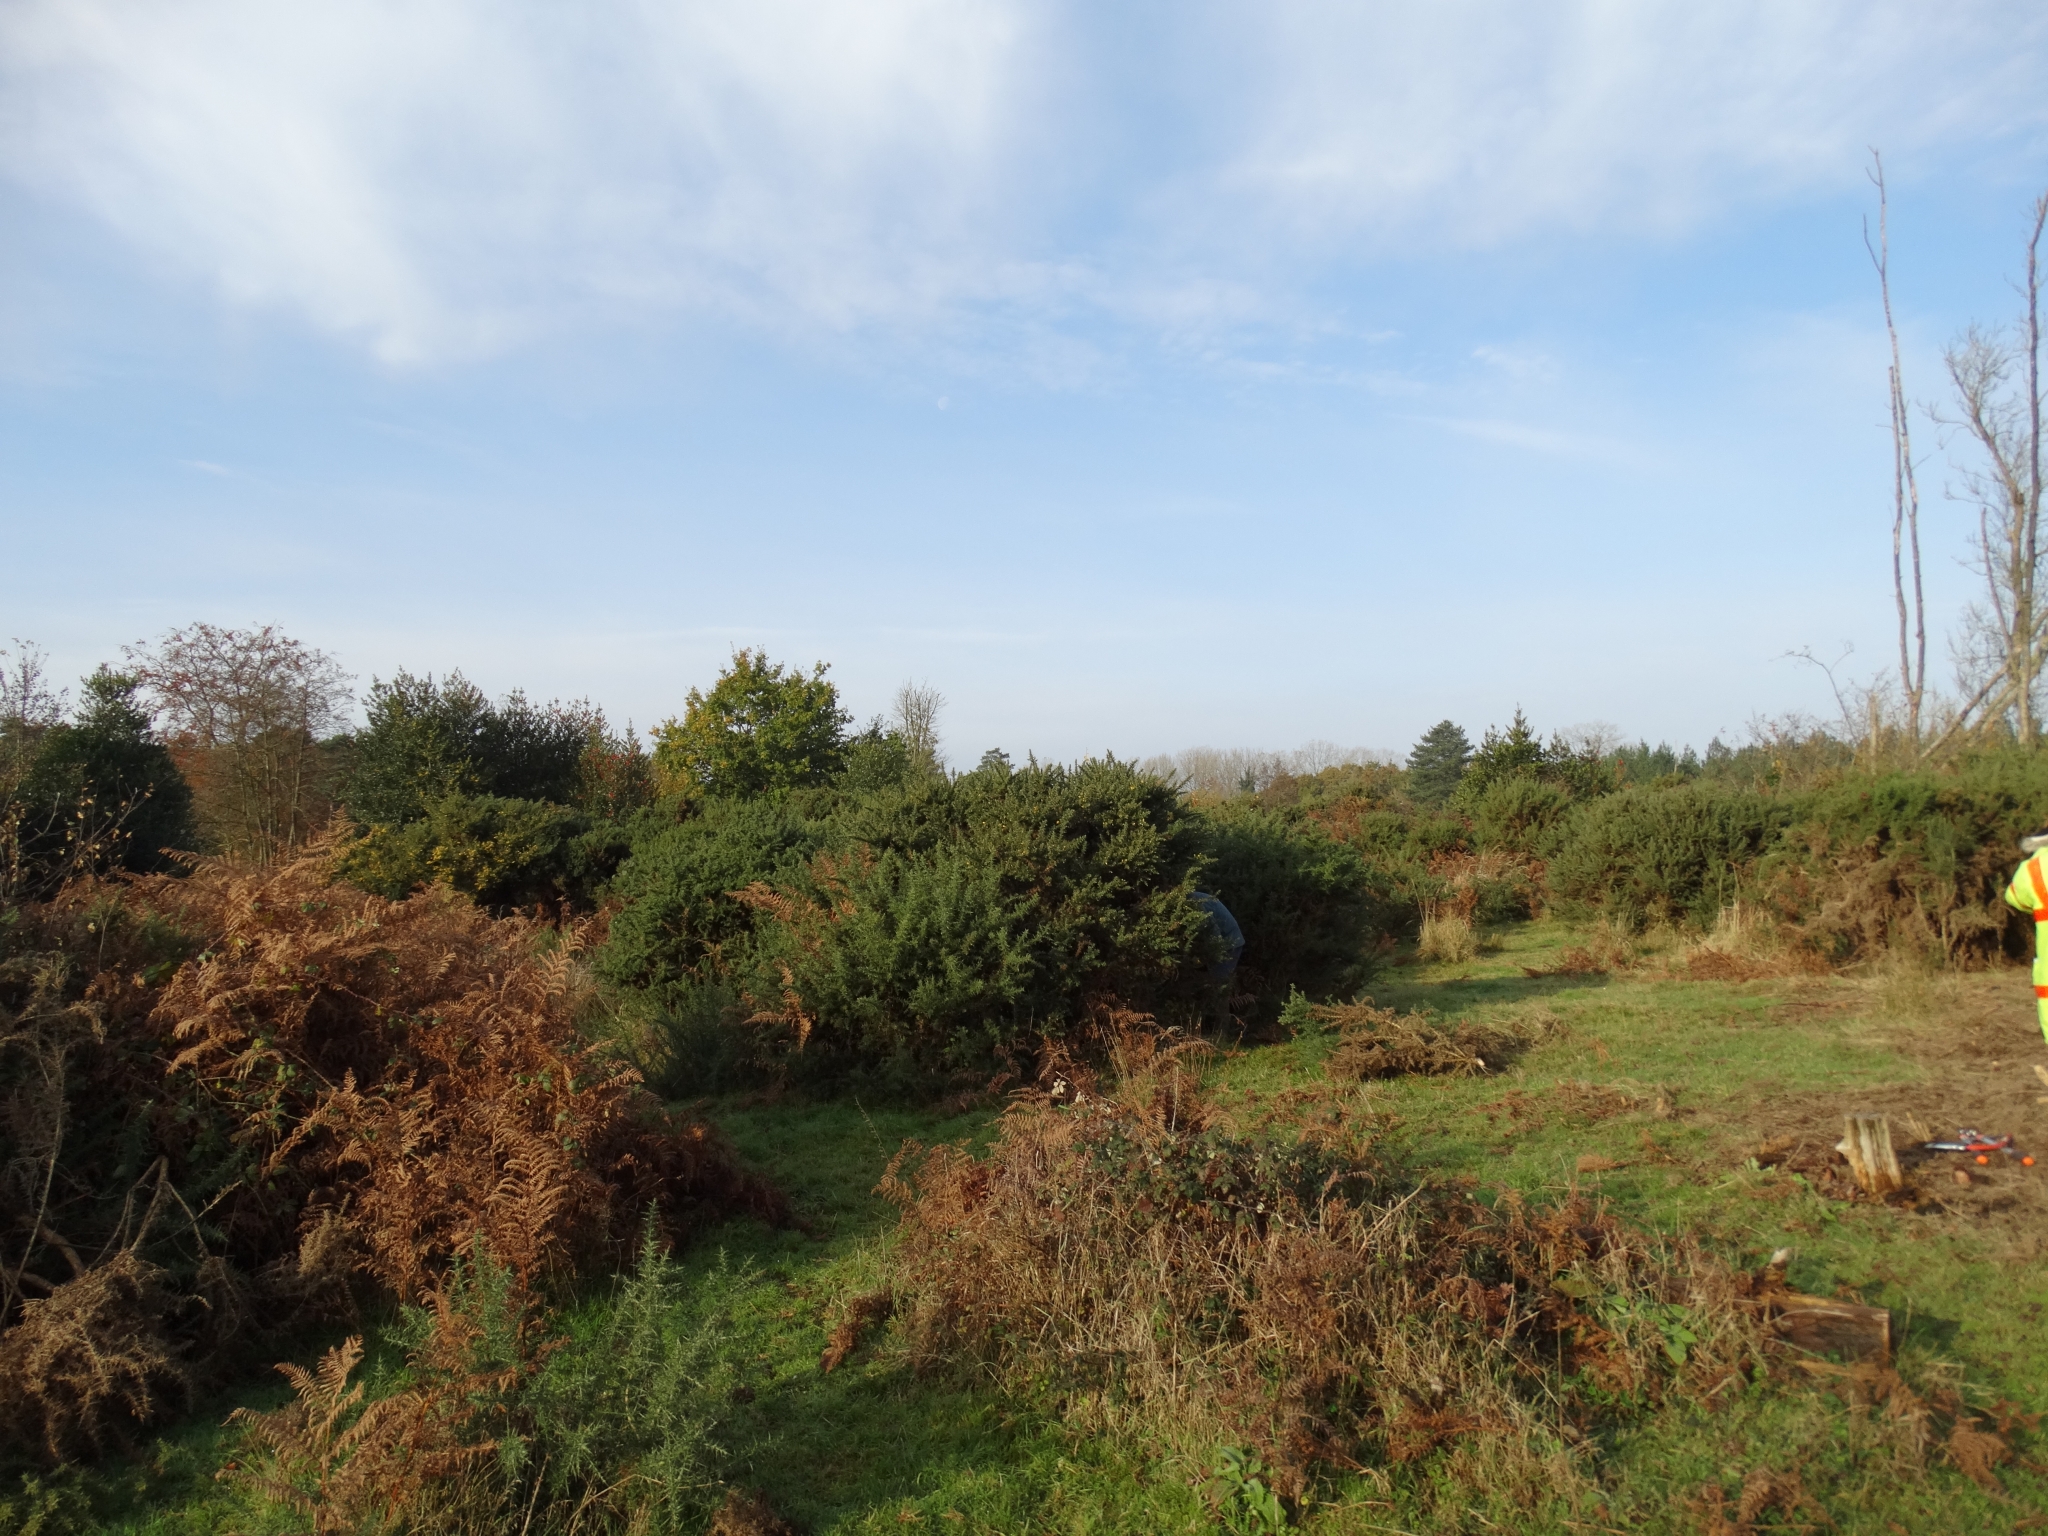 A photo from the FoTF Conservation Event - November 2019 - Gorse Clearance at Hockham Hills & Holes : A Gorse bush